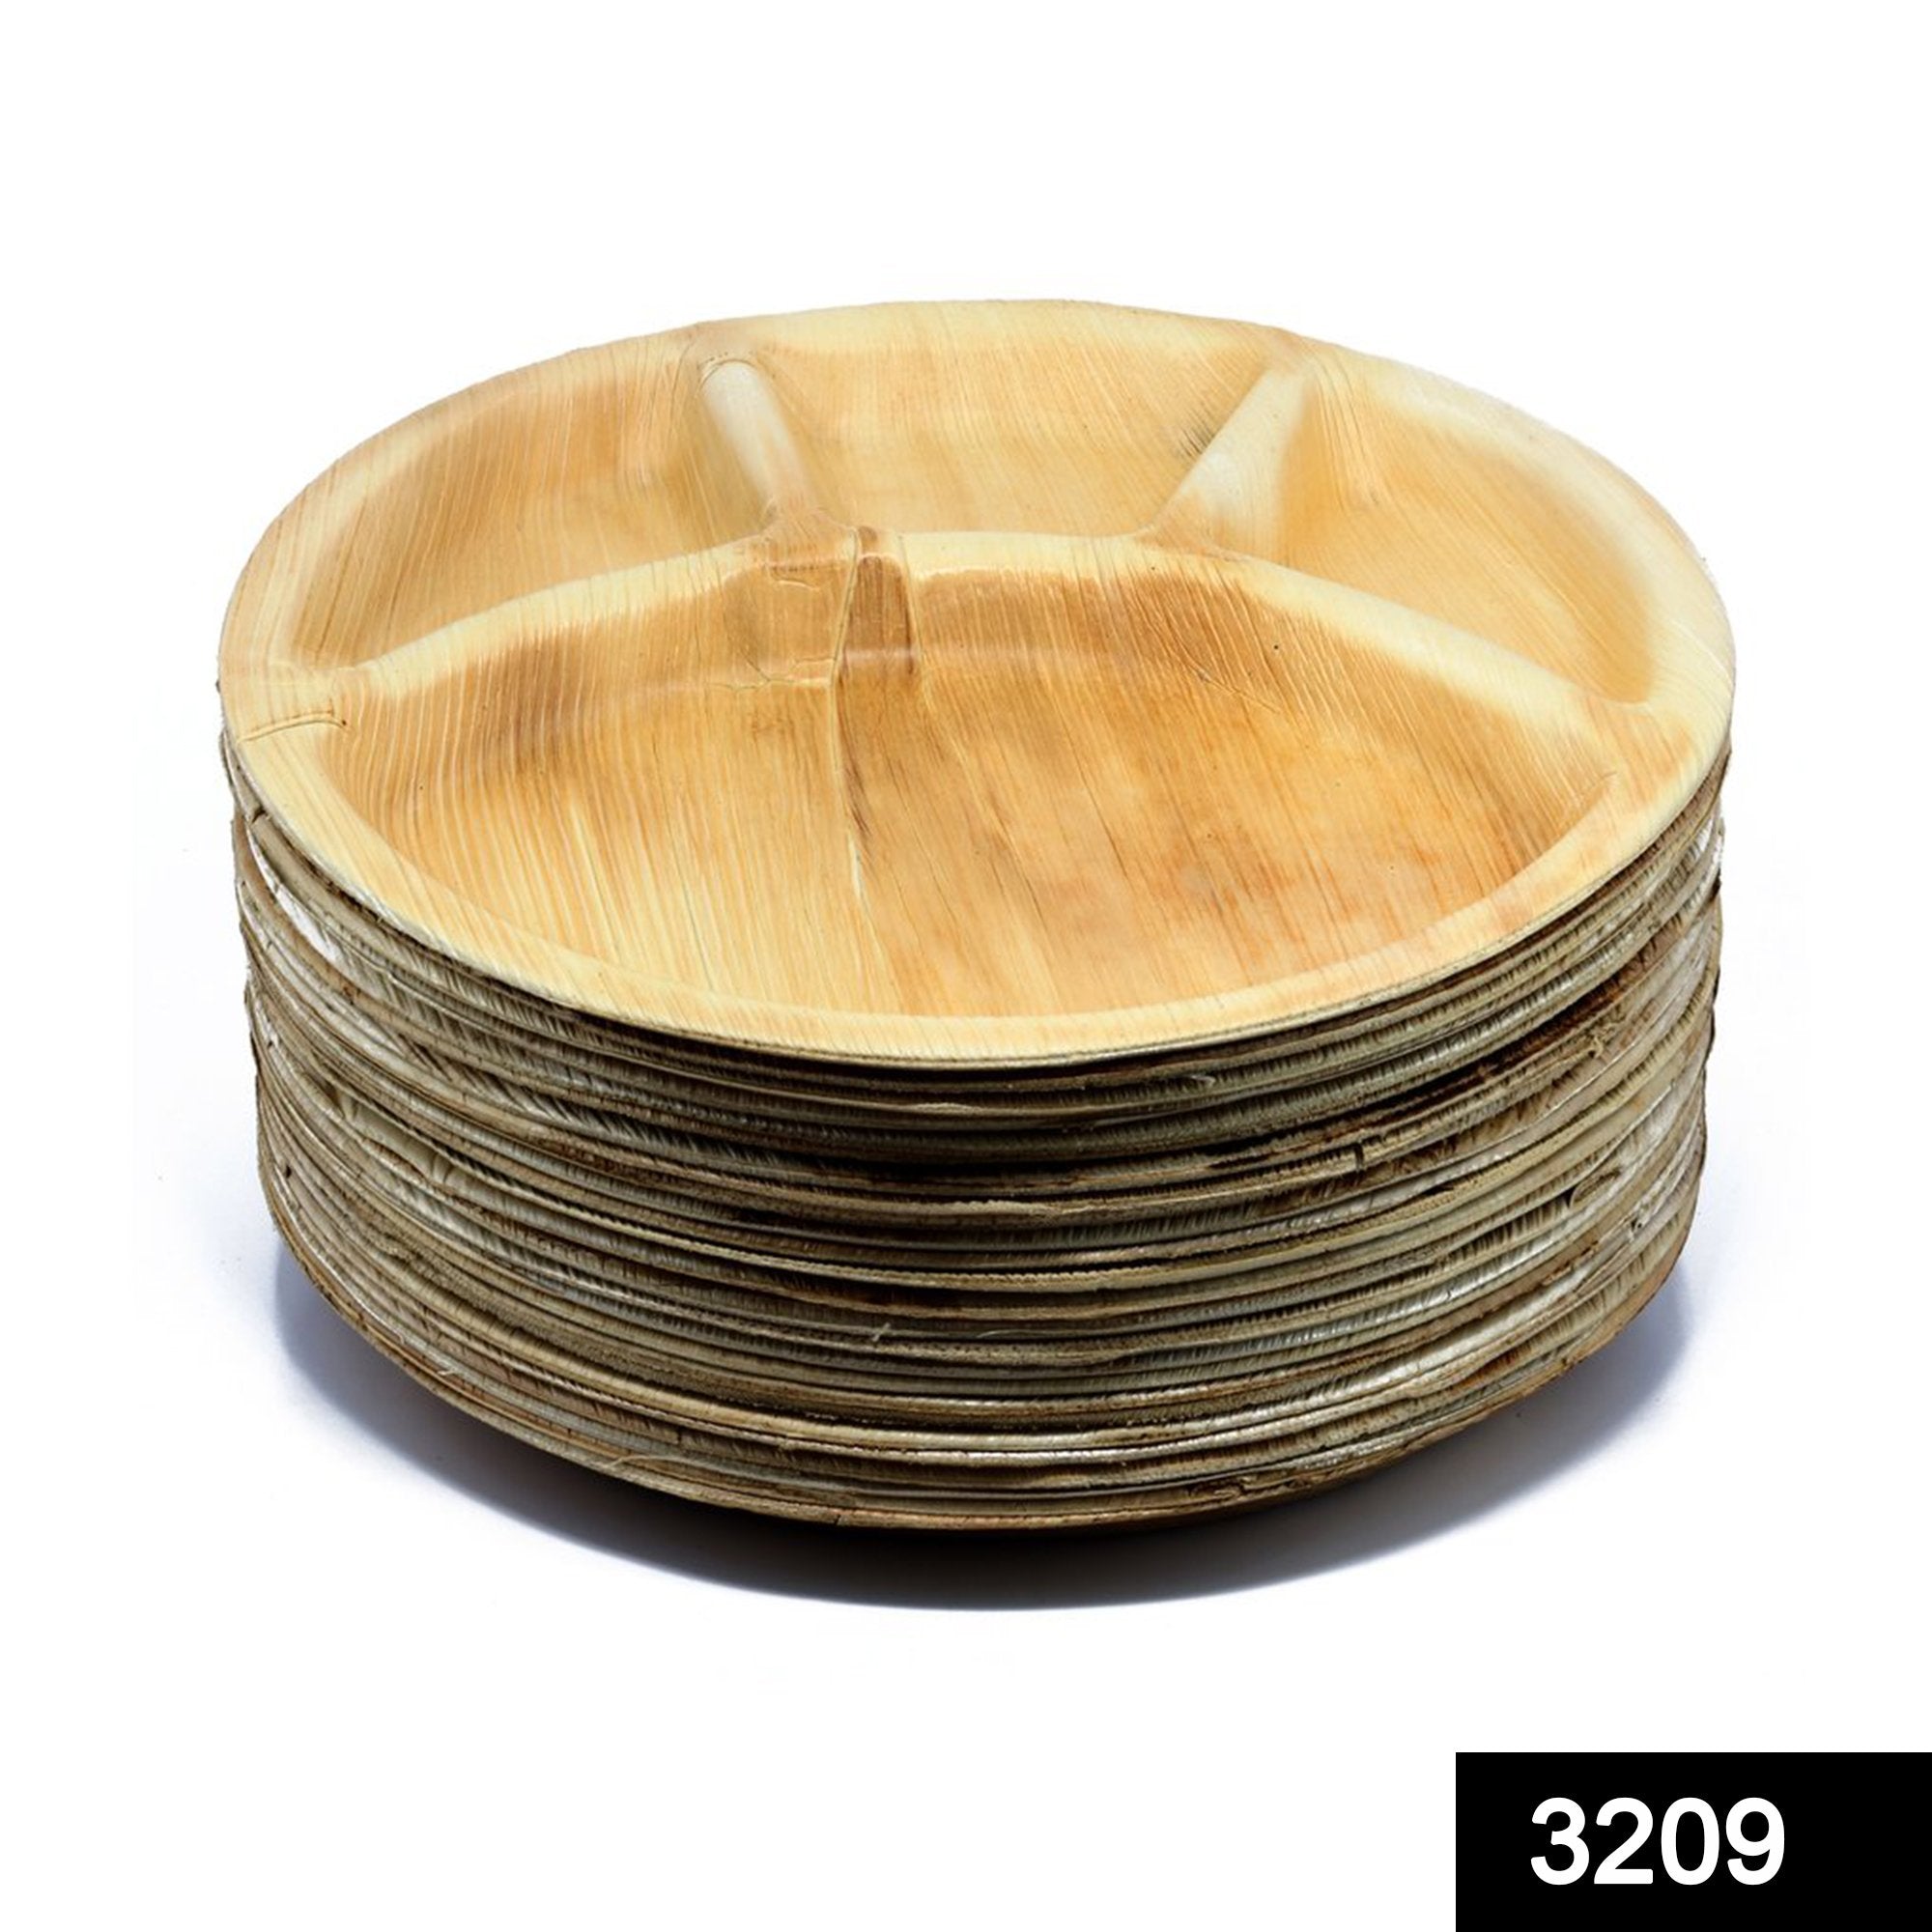 3209 Disposable Round Shape 4 Section Eco-friendly Areca Palm Leaf Plate (12x12 inch) (pack of 25) - SkyShopy